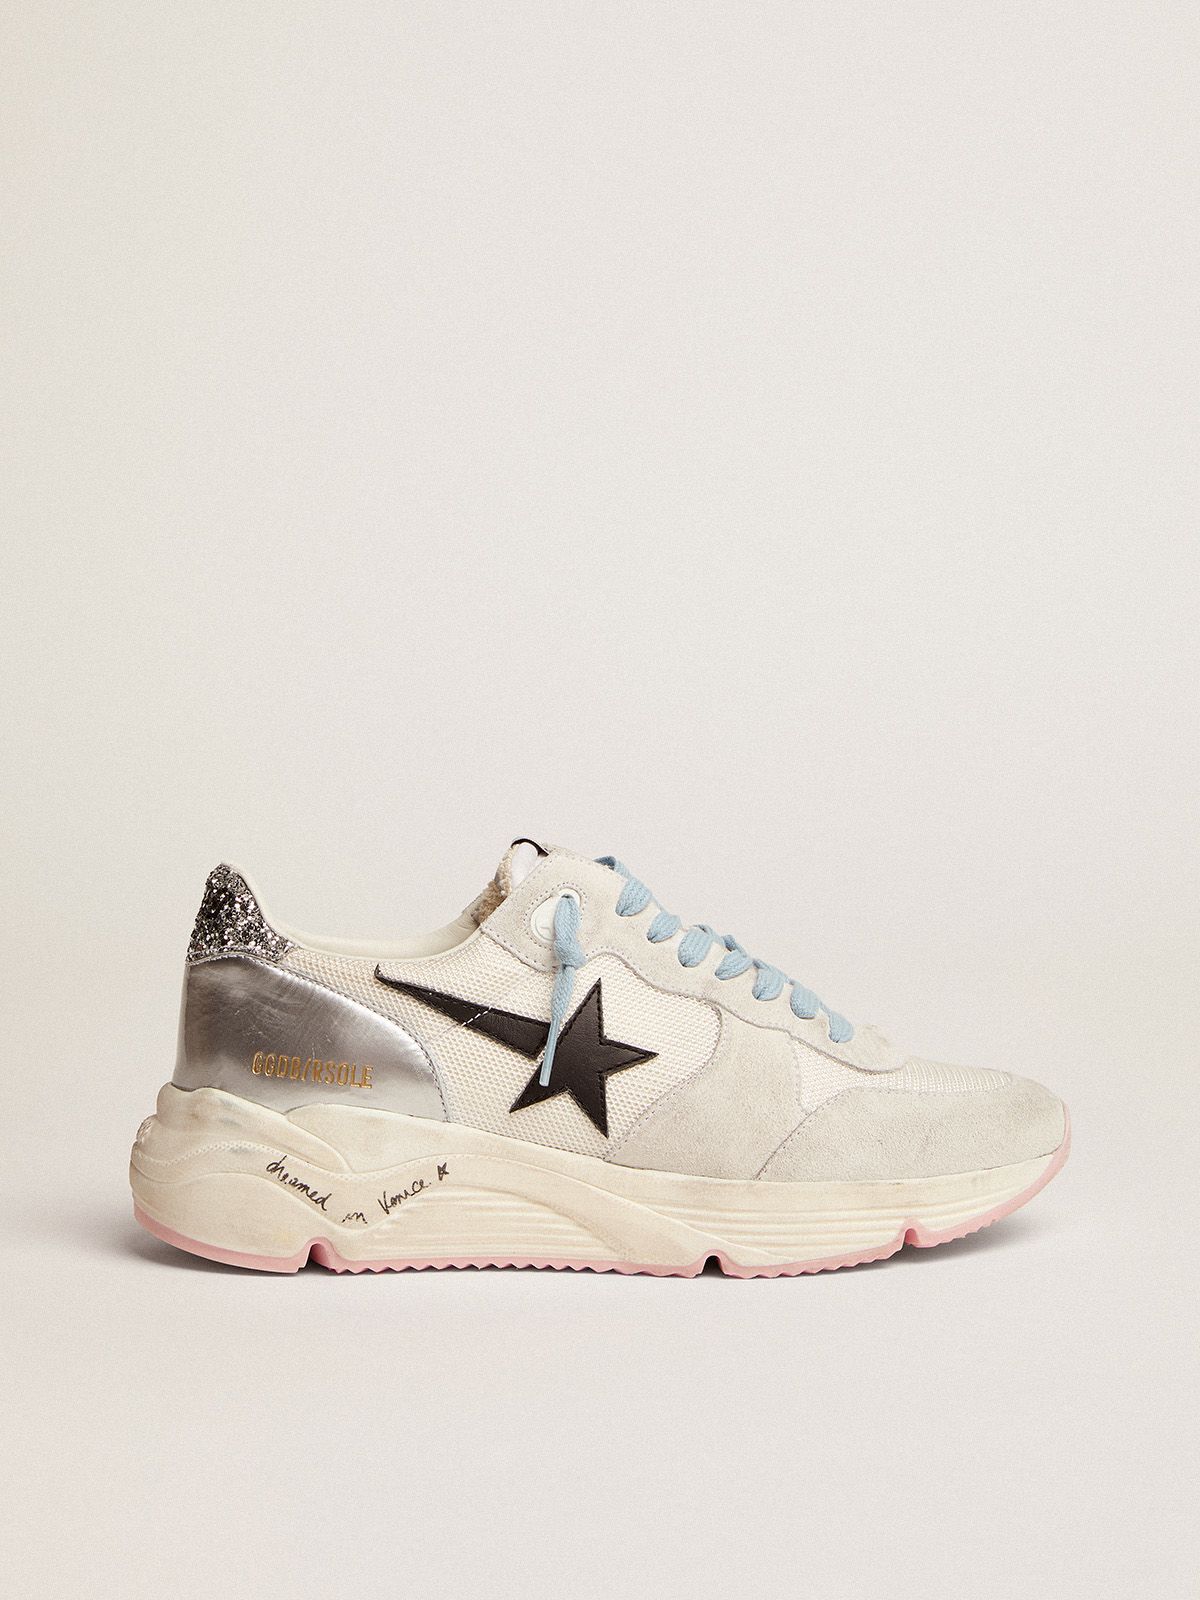 golden goose suede sneakers silver Sole in glitter star white black with tab and mesh LTD Running heel leather